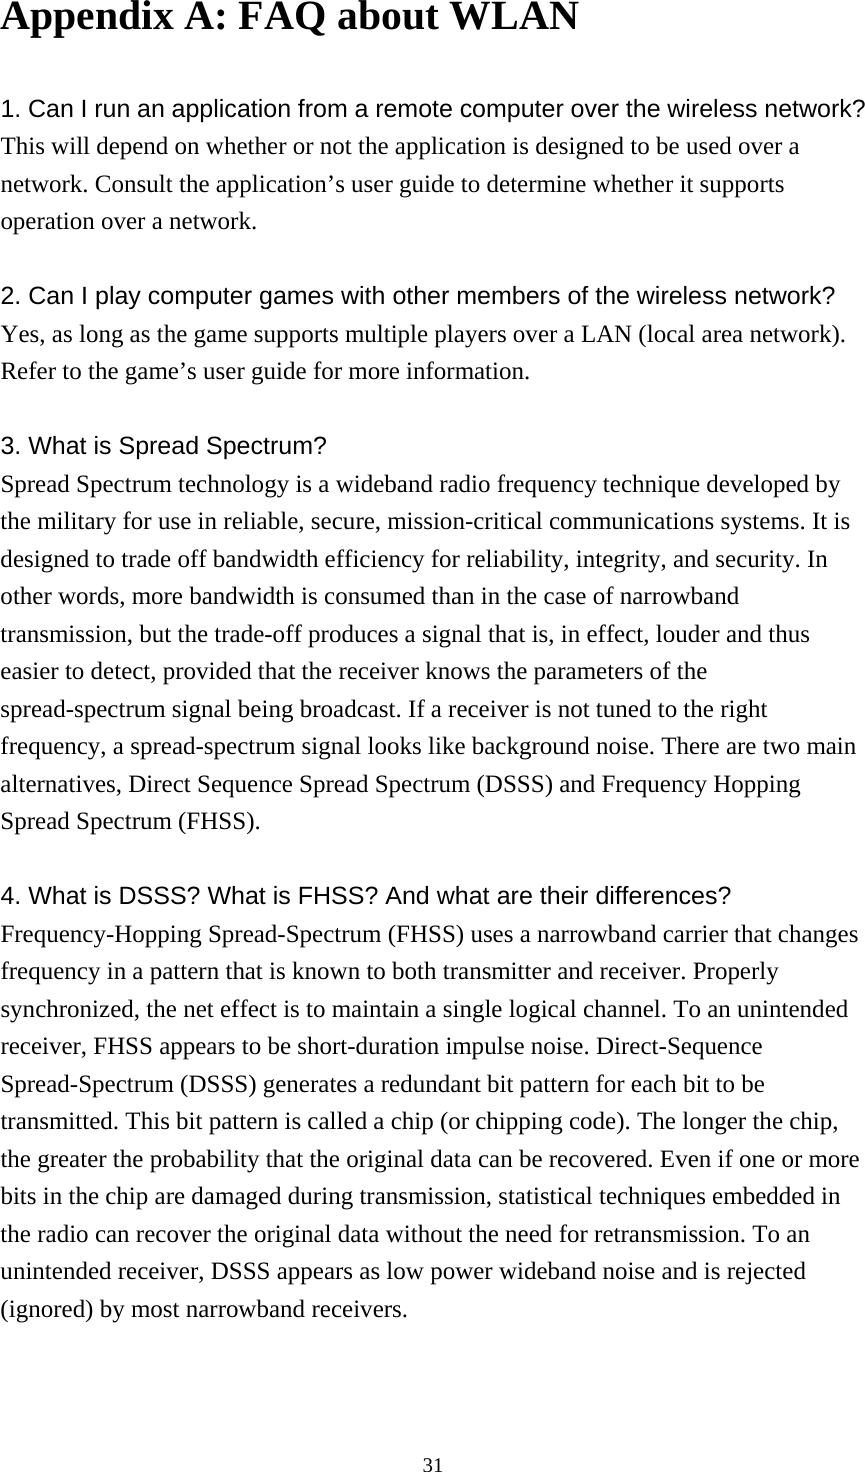  31Appendix A: FAQ about WLAN  1. Can I run an application from a remote computer over the wireless network? This will depend on whether or not the application is designed to be used over a network. Consult the application’s user guide to determine whether it supports operation over a network.  2. Can I play computer games with other members of the wireless network? Yes, as long as the game supports multiple players over a LAN (local area network). Refer to the game’s user guide for more information.  3. What is Spread Spectrum? Spread Spectrum technology is a wideband radio frequency technique developed by the military for use in reliable, secure, mission-critical communications systems. It is designed to trade off bandwidth efficiency for reliability, integrity, and security. In other words, more bandwidth is consumed than in the case of narrowband transmission, but the trade-off produces a signal that is, in effect, louder and thus easier to detect, provided that the receiver knows the parameters of the spread-spectrum signal being broadcast. If a receiver is not tuned to the right frequency, a spread-spectrum signal looks like background noise. There are two main alternatives, Direct Sequence Spread Spectrum (DSSS) and Frequency Hopping Spread Spectrum (FHSS).  4. What is DSSS? What is FHSS? And what are their differences? Frequency-Hopping Spread-Spectrum (FHSS) uses a narrowband carrier that changes frequency in a pattern that is known to both transmitter and receiver. Properly synchronized, the net effect is to maintain a single logical channel. To an unintended receiver, FHSS appears to be short-duration impulse noise. Direct-Sequence Spread-Spectrum (DSSS) generates a redundant bit pattern for each bit to be transmitted. This bit pattern is called a chip (or chipping code). The longer the chip, the greater the probability that the original data can be recovered. Even if one or more bits in the chip are damaged during transmission, statistical techniques embedded in the radio can recover the original data without the need for retransmission. To an unintended receiver, DSSS appears as low power wideband noise and is rejected (ignored) by most narrowband receivers.  